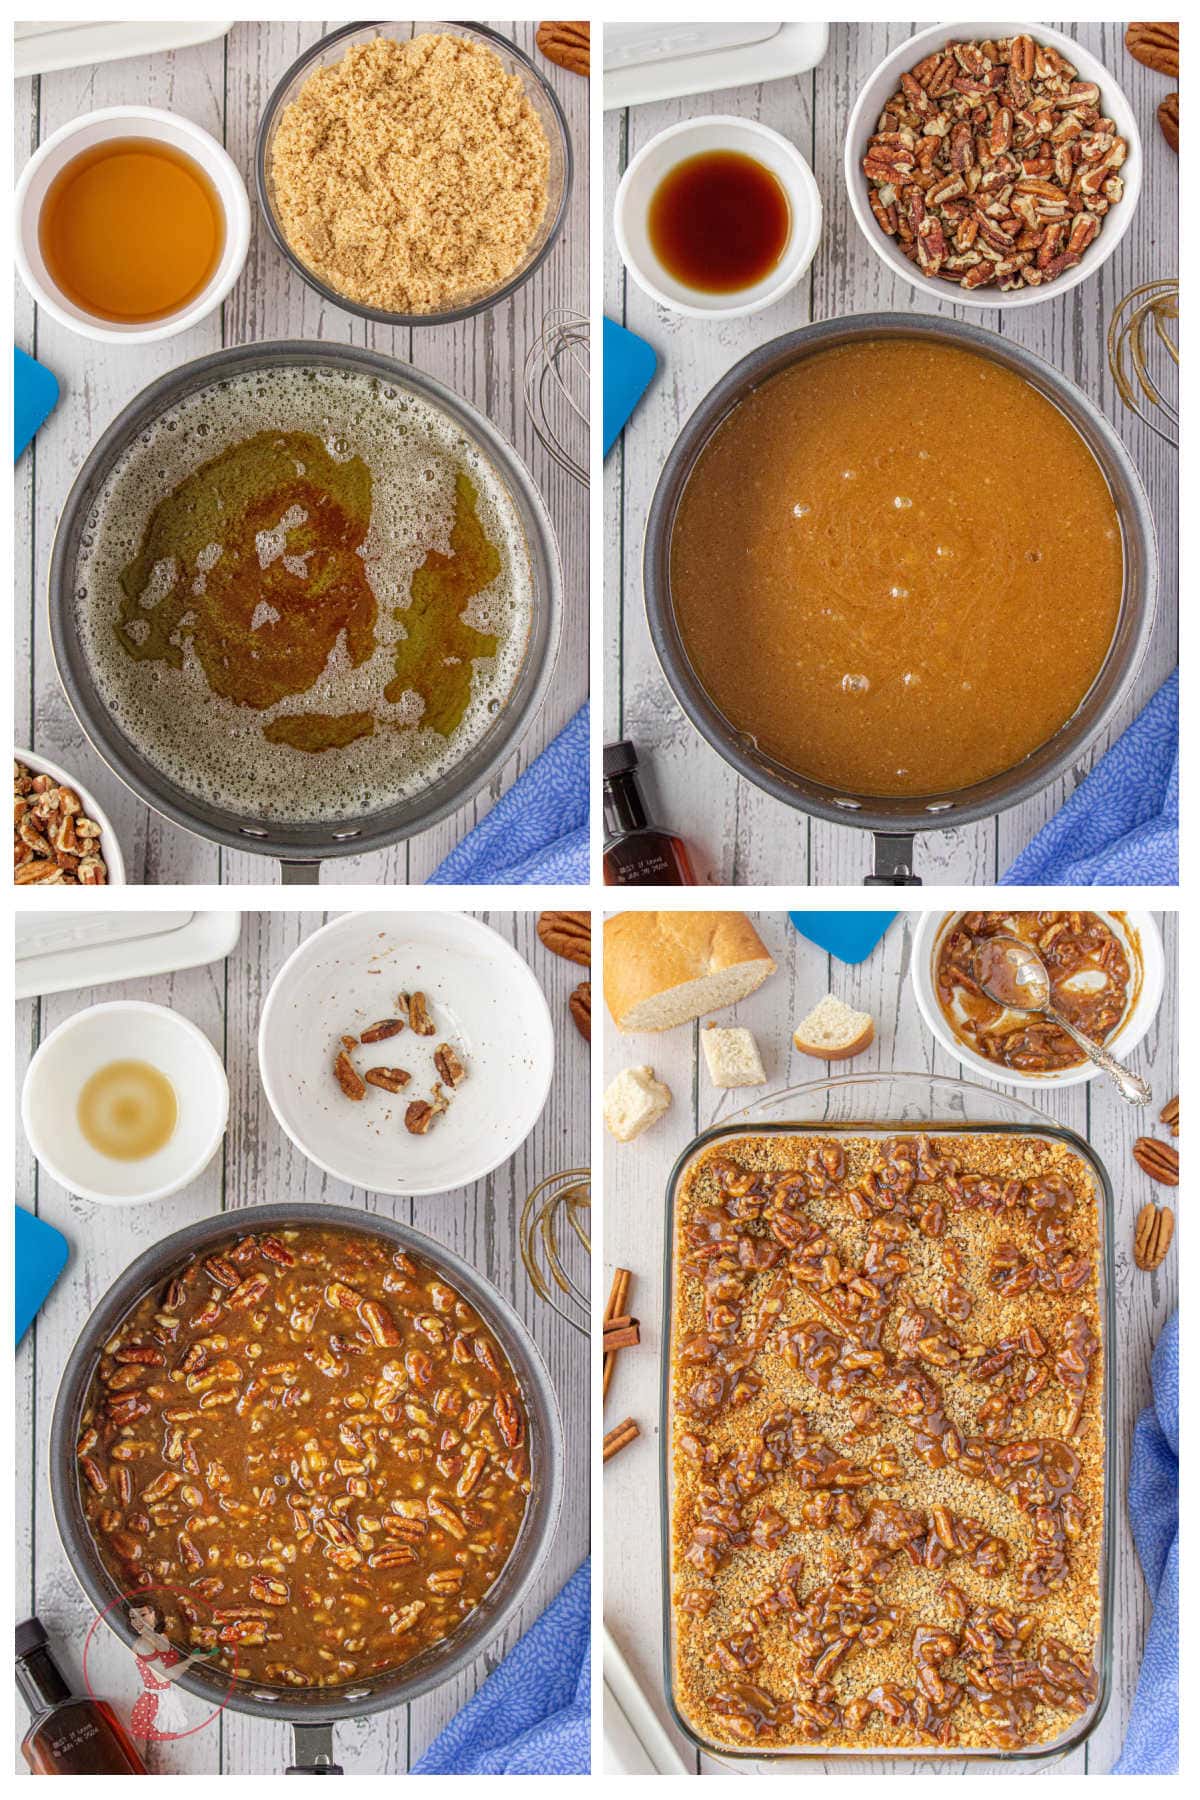 Step by step images showing how to make the praline pecan sauce for the pudding.